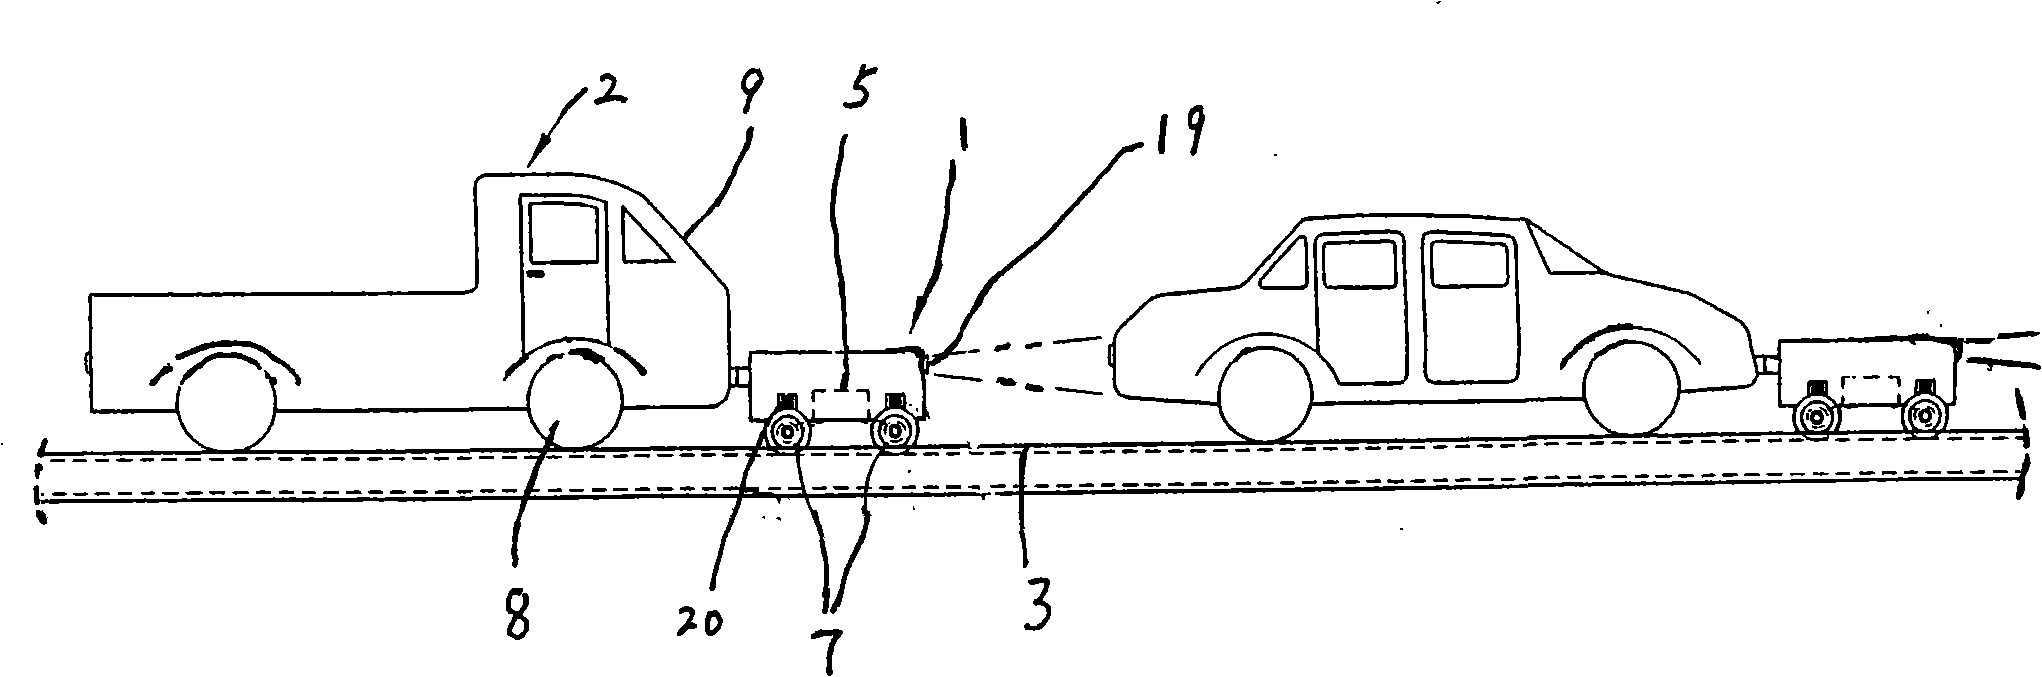 Long-distance displacement system of electrization towing type automobile